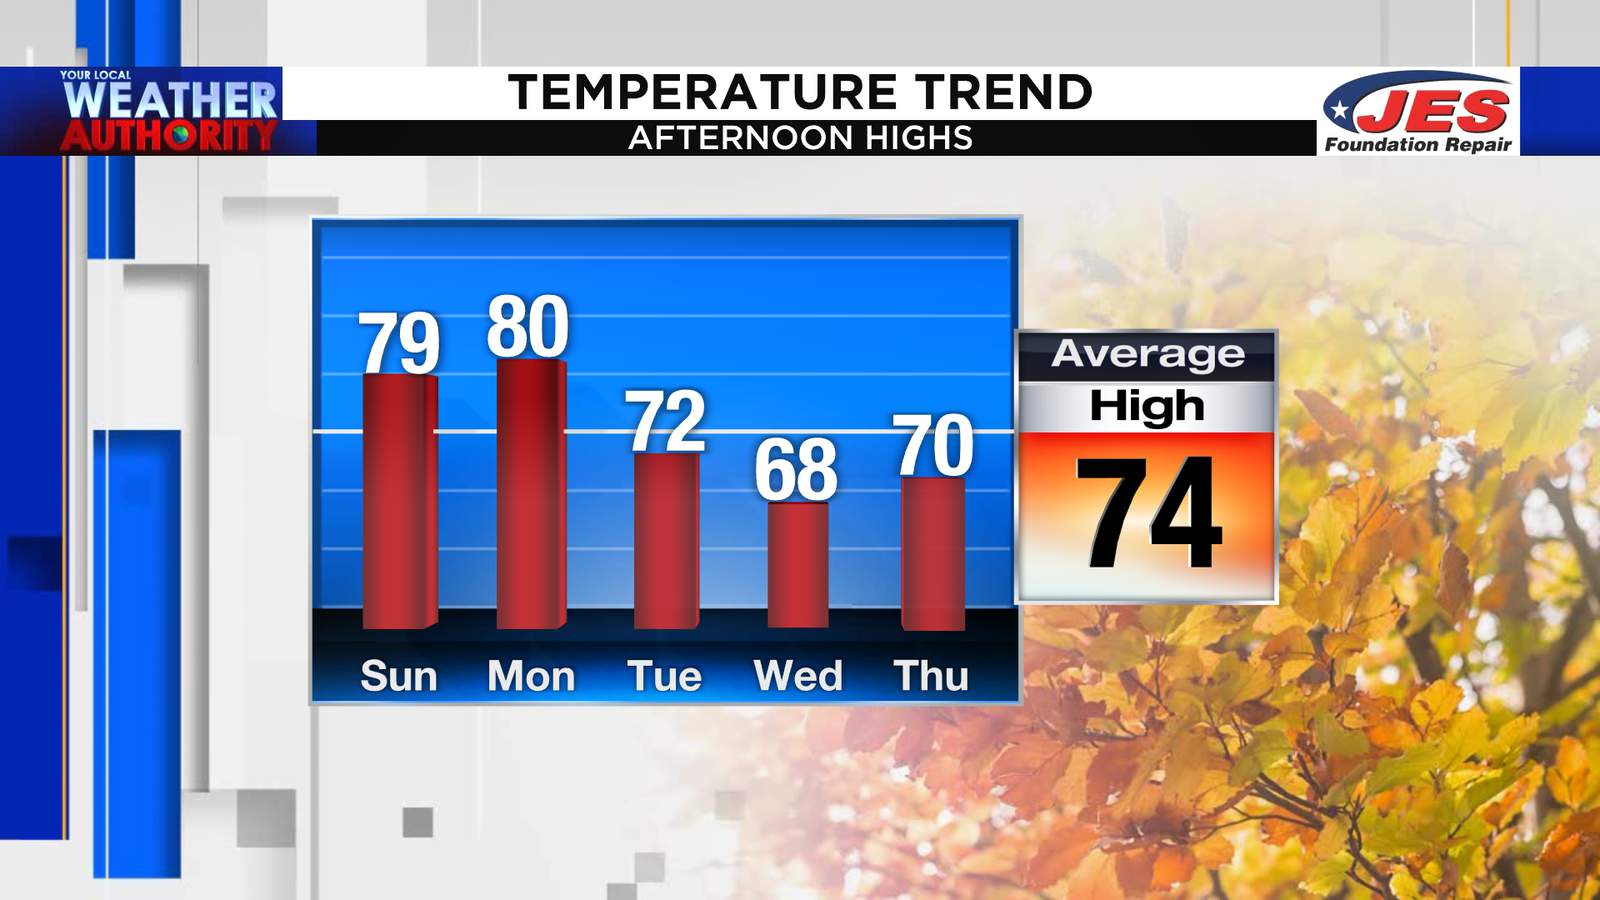 Trending warmer before a pair of fronts causes temperatures to dive later this week